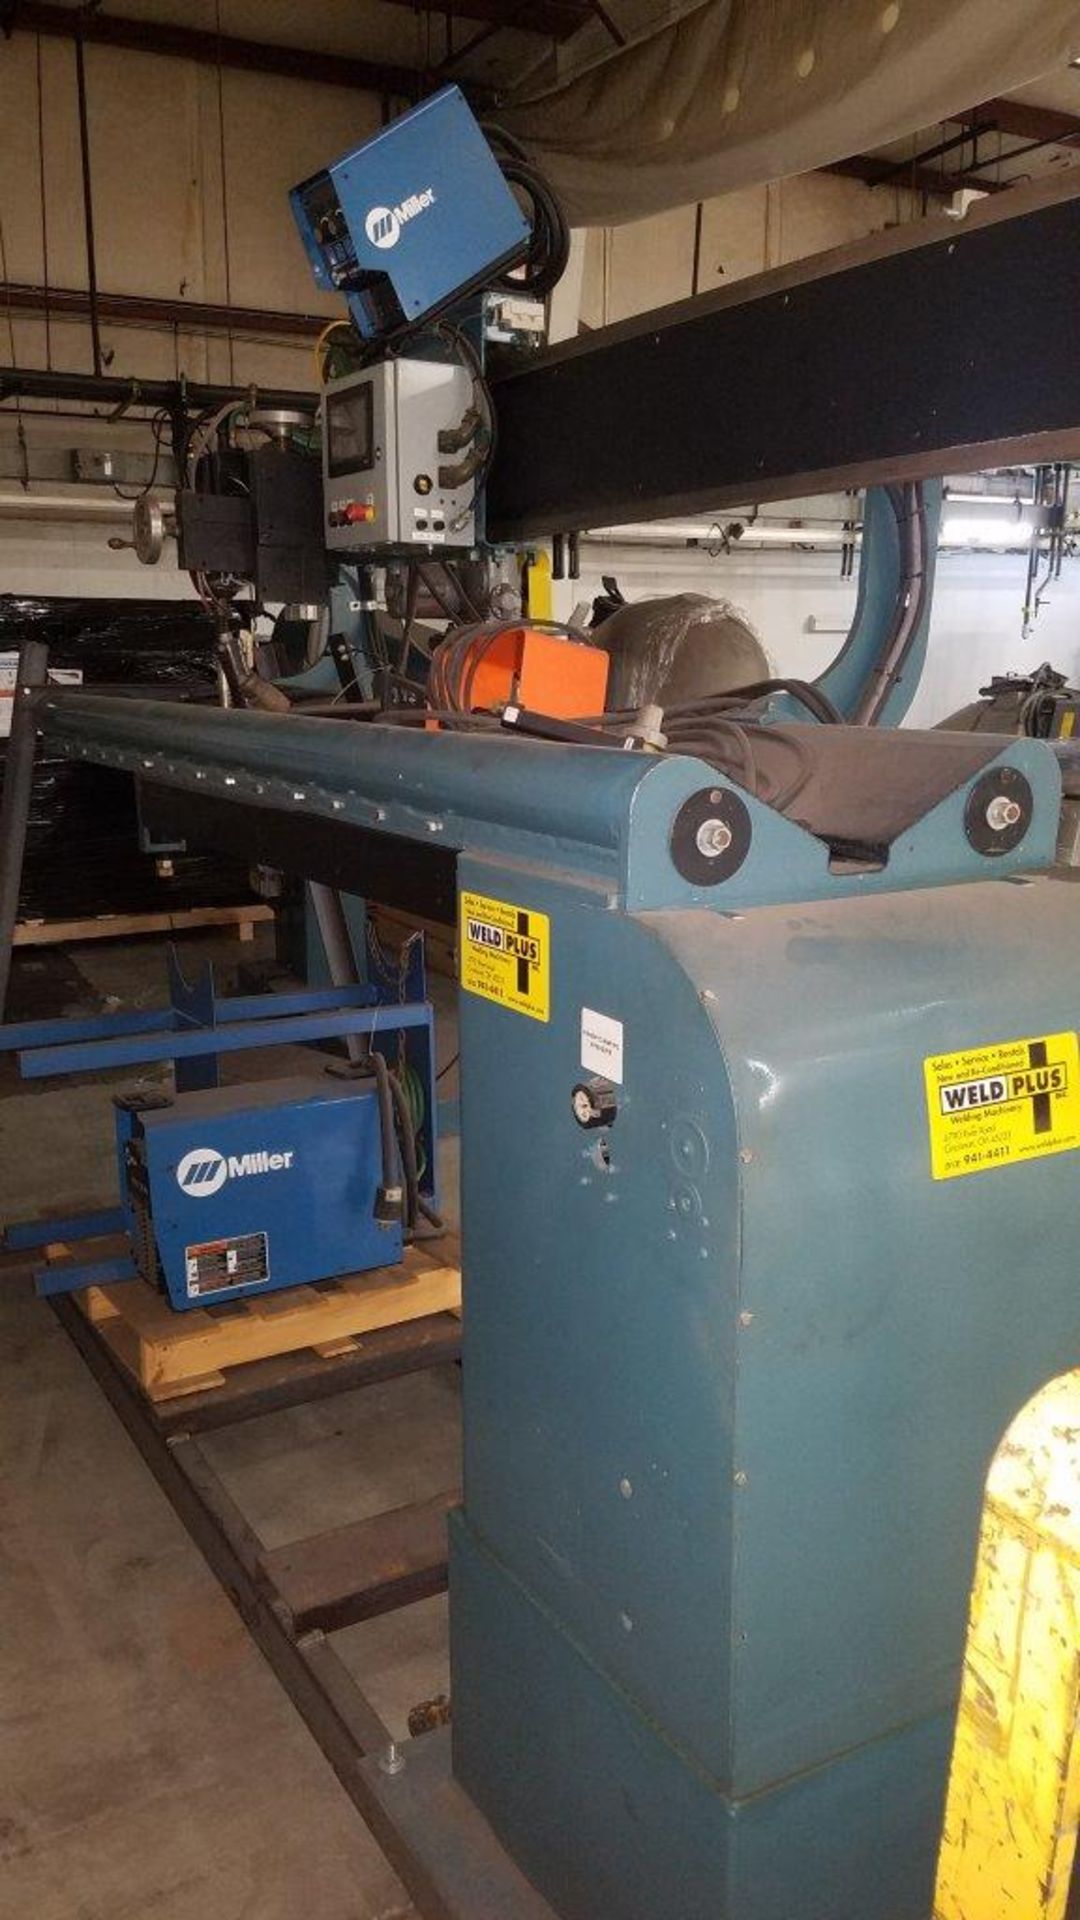 Jetline Seam Welder w/ Miller Invision 352, Mdl: LW-84, S/N: N/A, 76" Max Clamp/Travel Distance, - Image 6 of 15